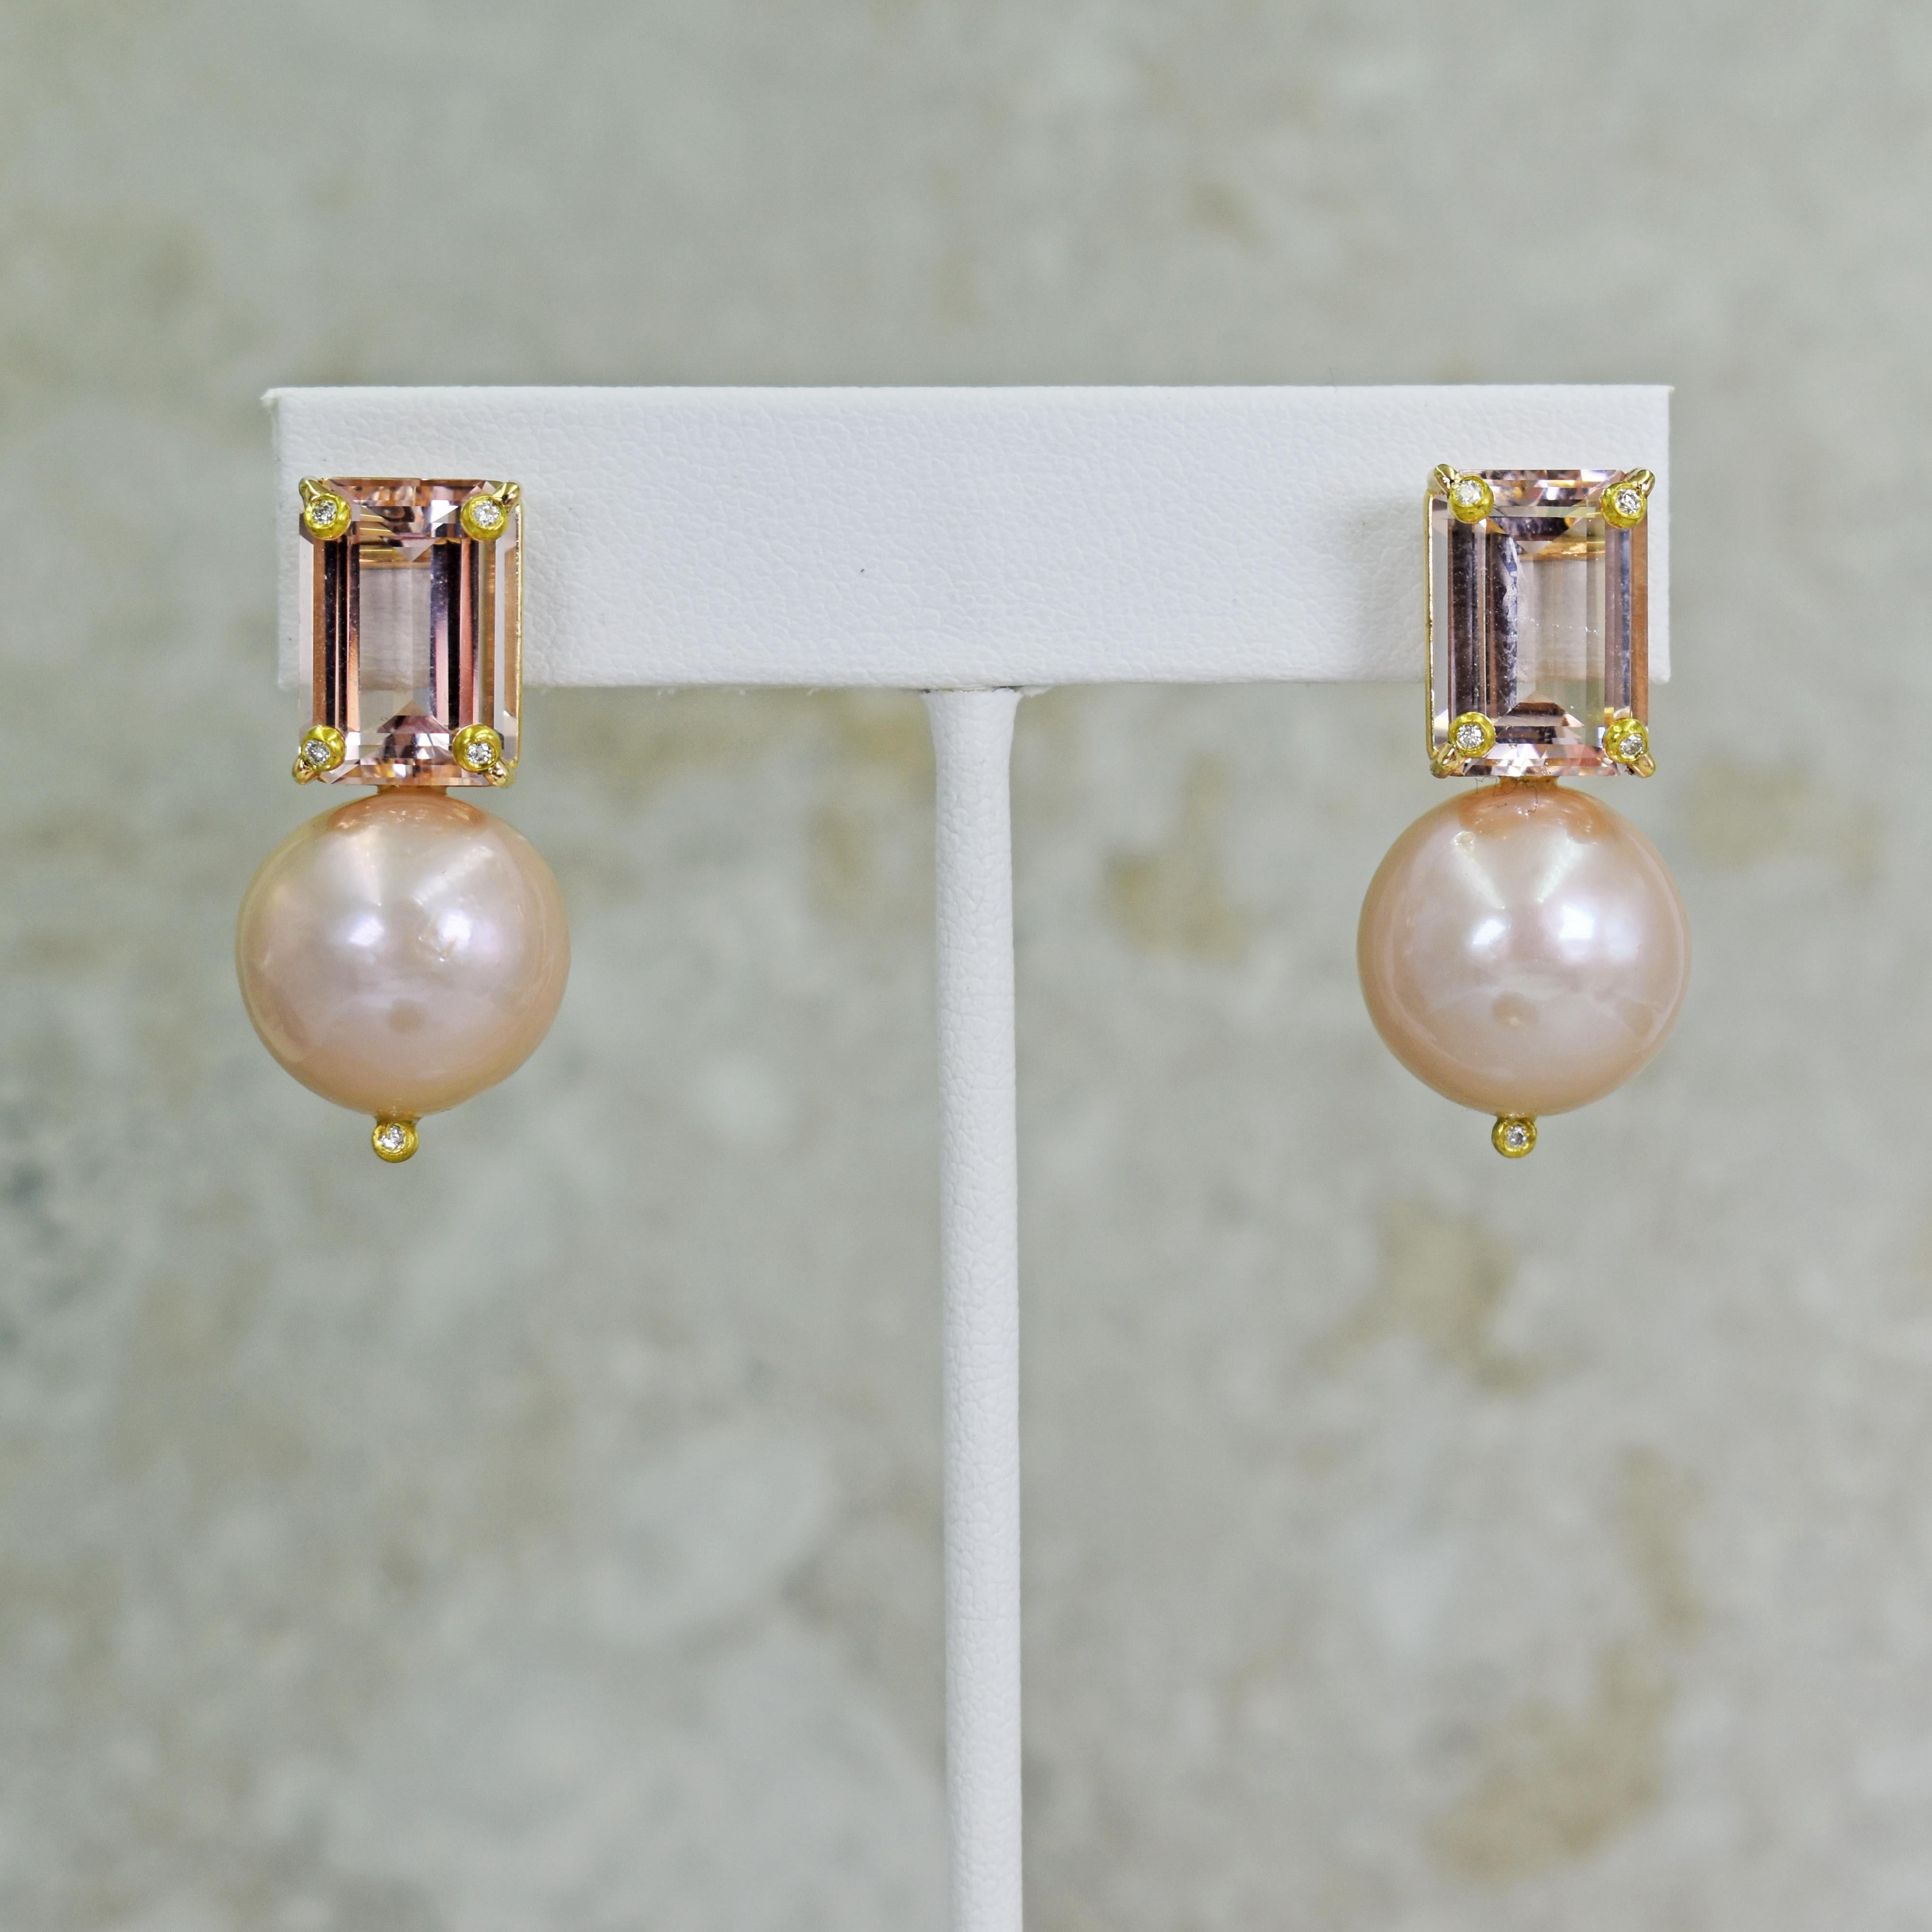 Emerald shaped 12.61 carat (total) pink Morganite, accent white Diamond and round, freshwater pink Pearls in 14k yellow gold stud drop earrings. Stud earrings are 1.25 inches in length. The beautiful, blush pink Morganite and Pearls paired with